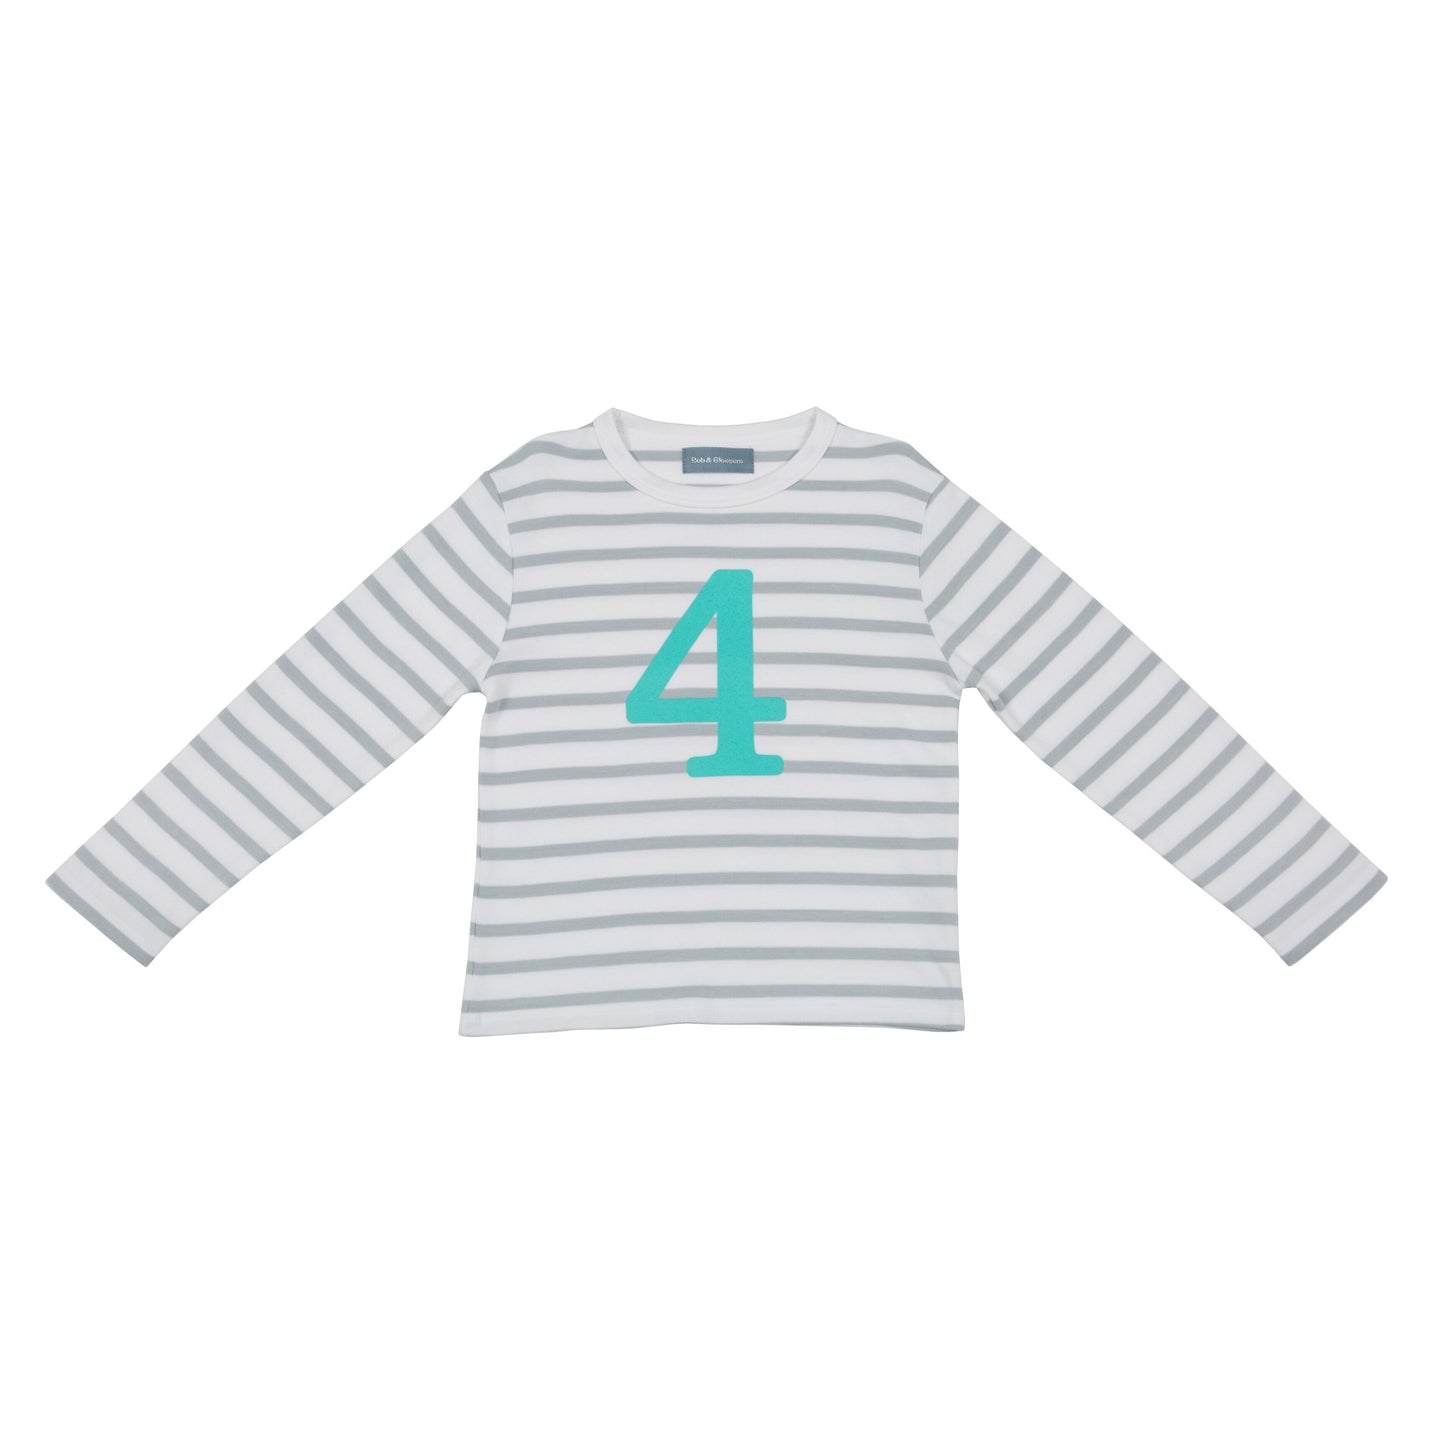 Bob & Blossom grey and white striped long sleeved t shirt with turquoise number 4